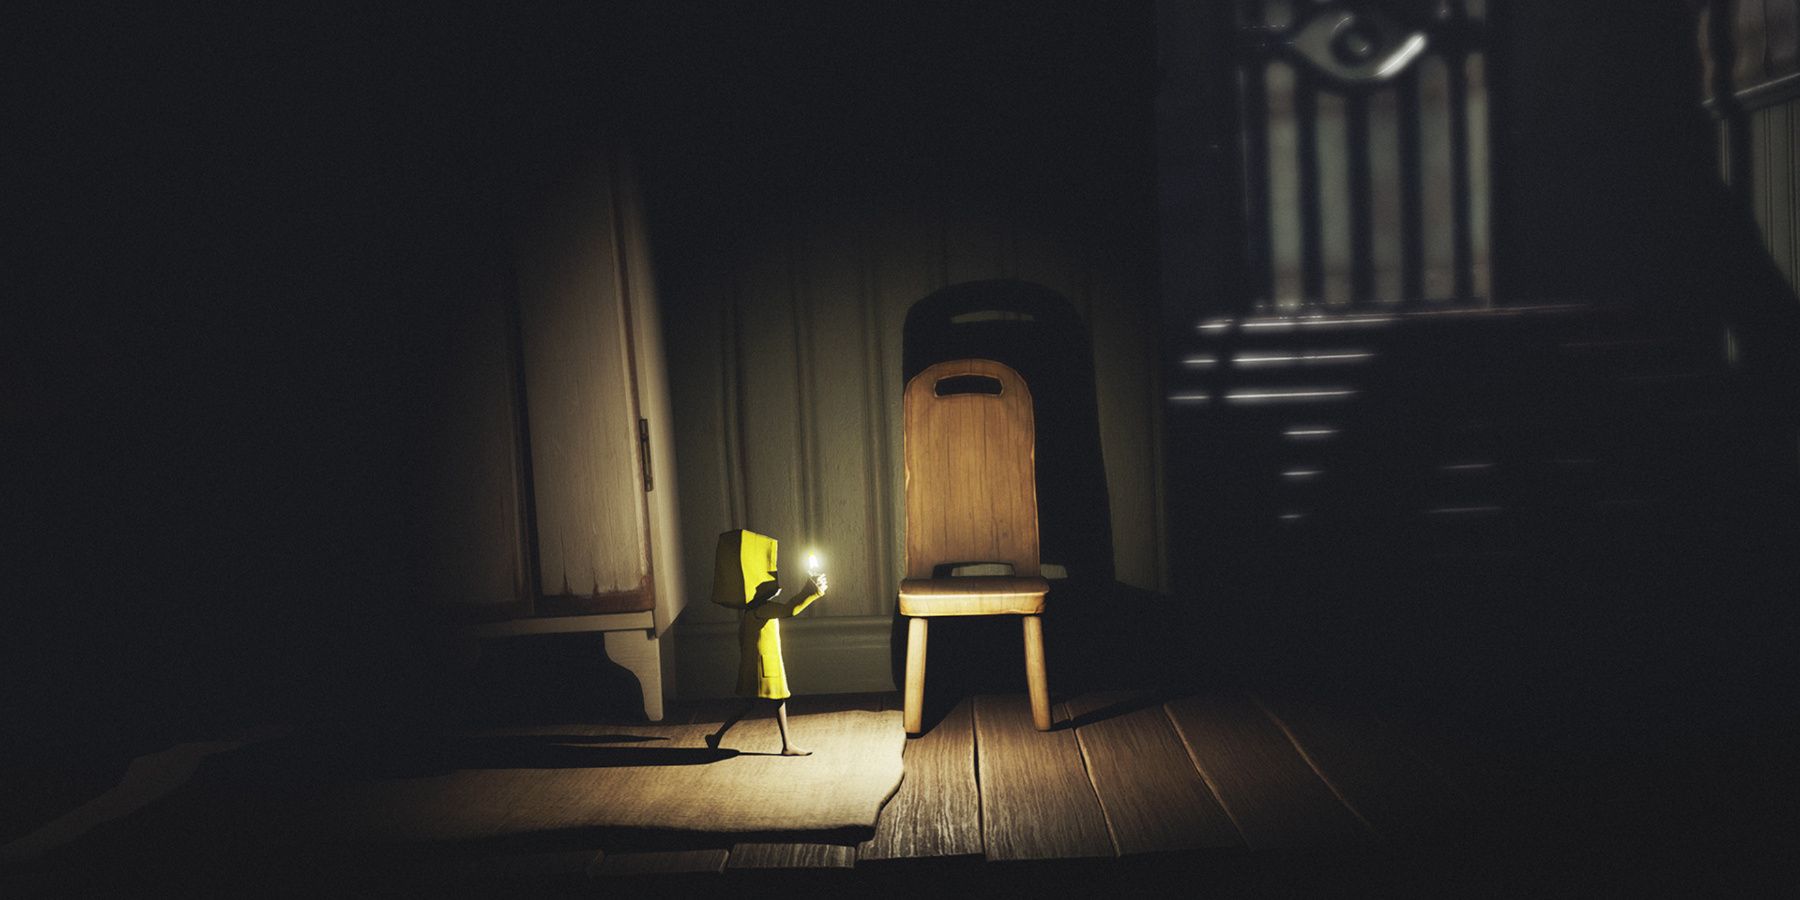 Little nightmares Mono holding a candle in a dark room